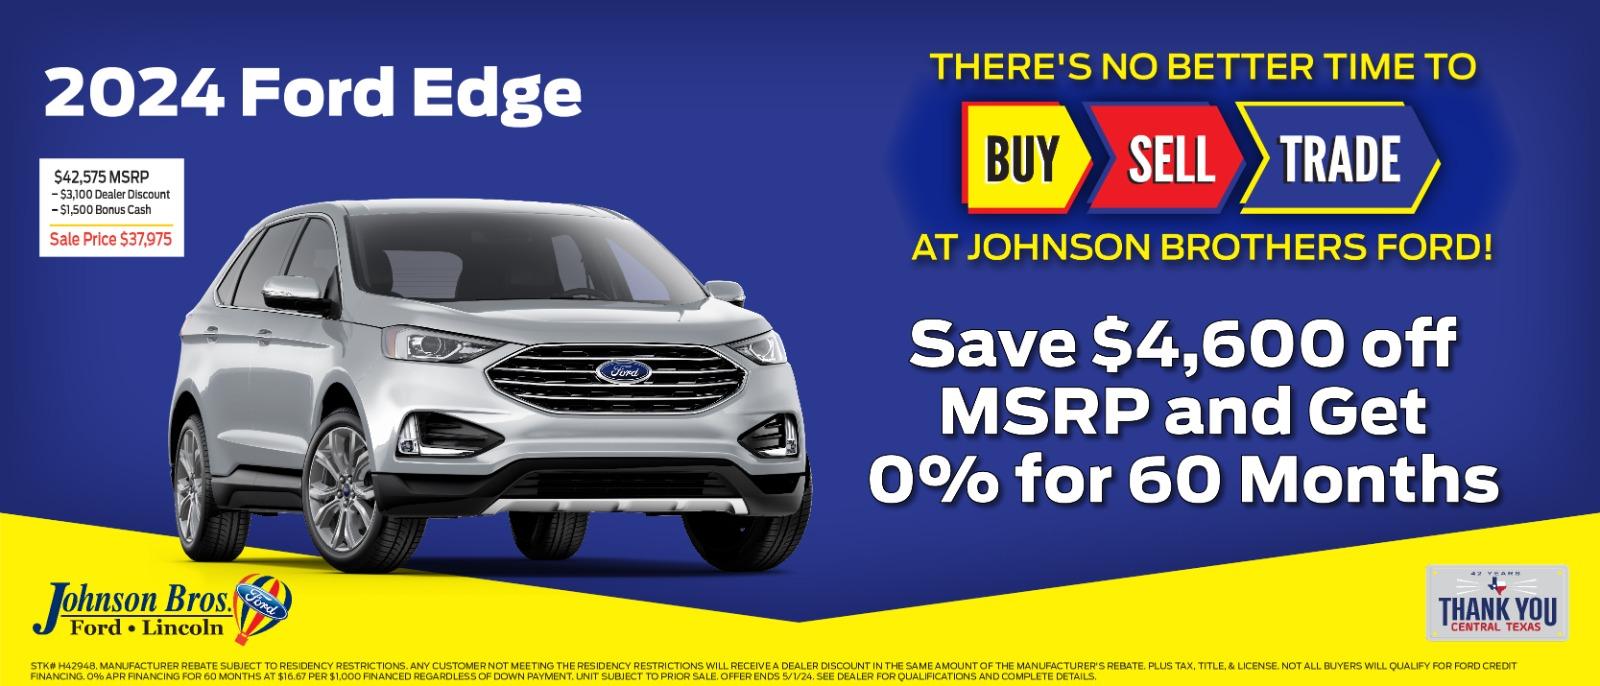 2024 Ford Edge

Save $4,600 off MSRP and get 0% for 60 months